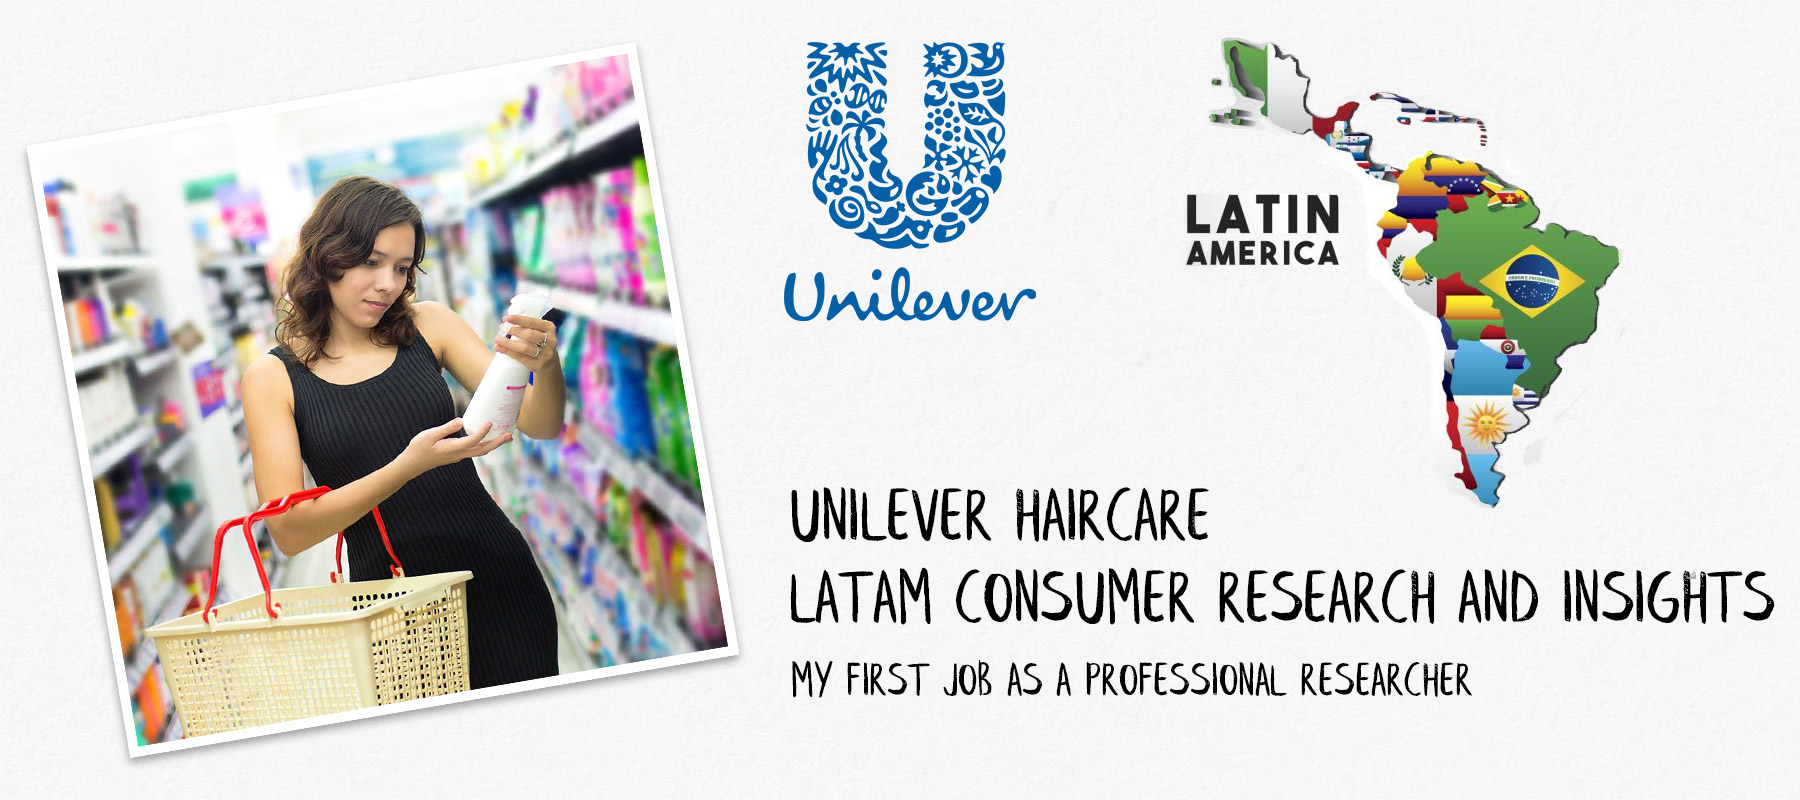 Unilever Haircare Consumer Research and Insights - Latin America